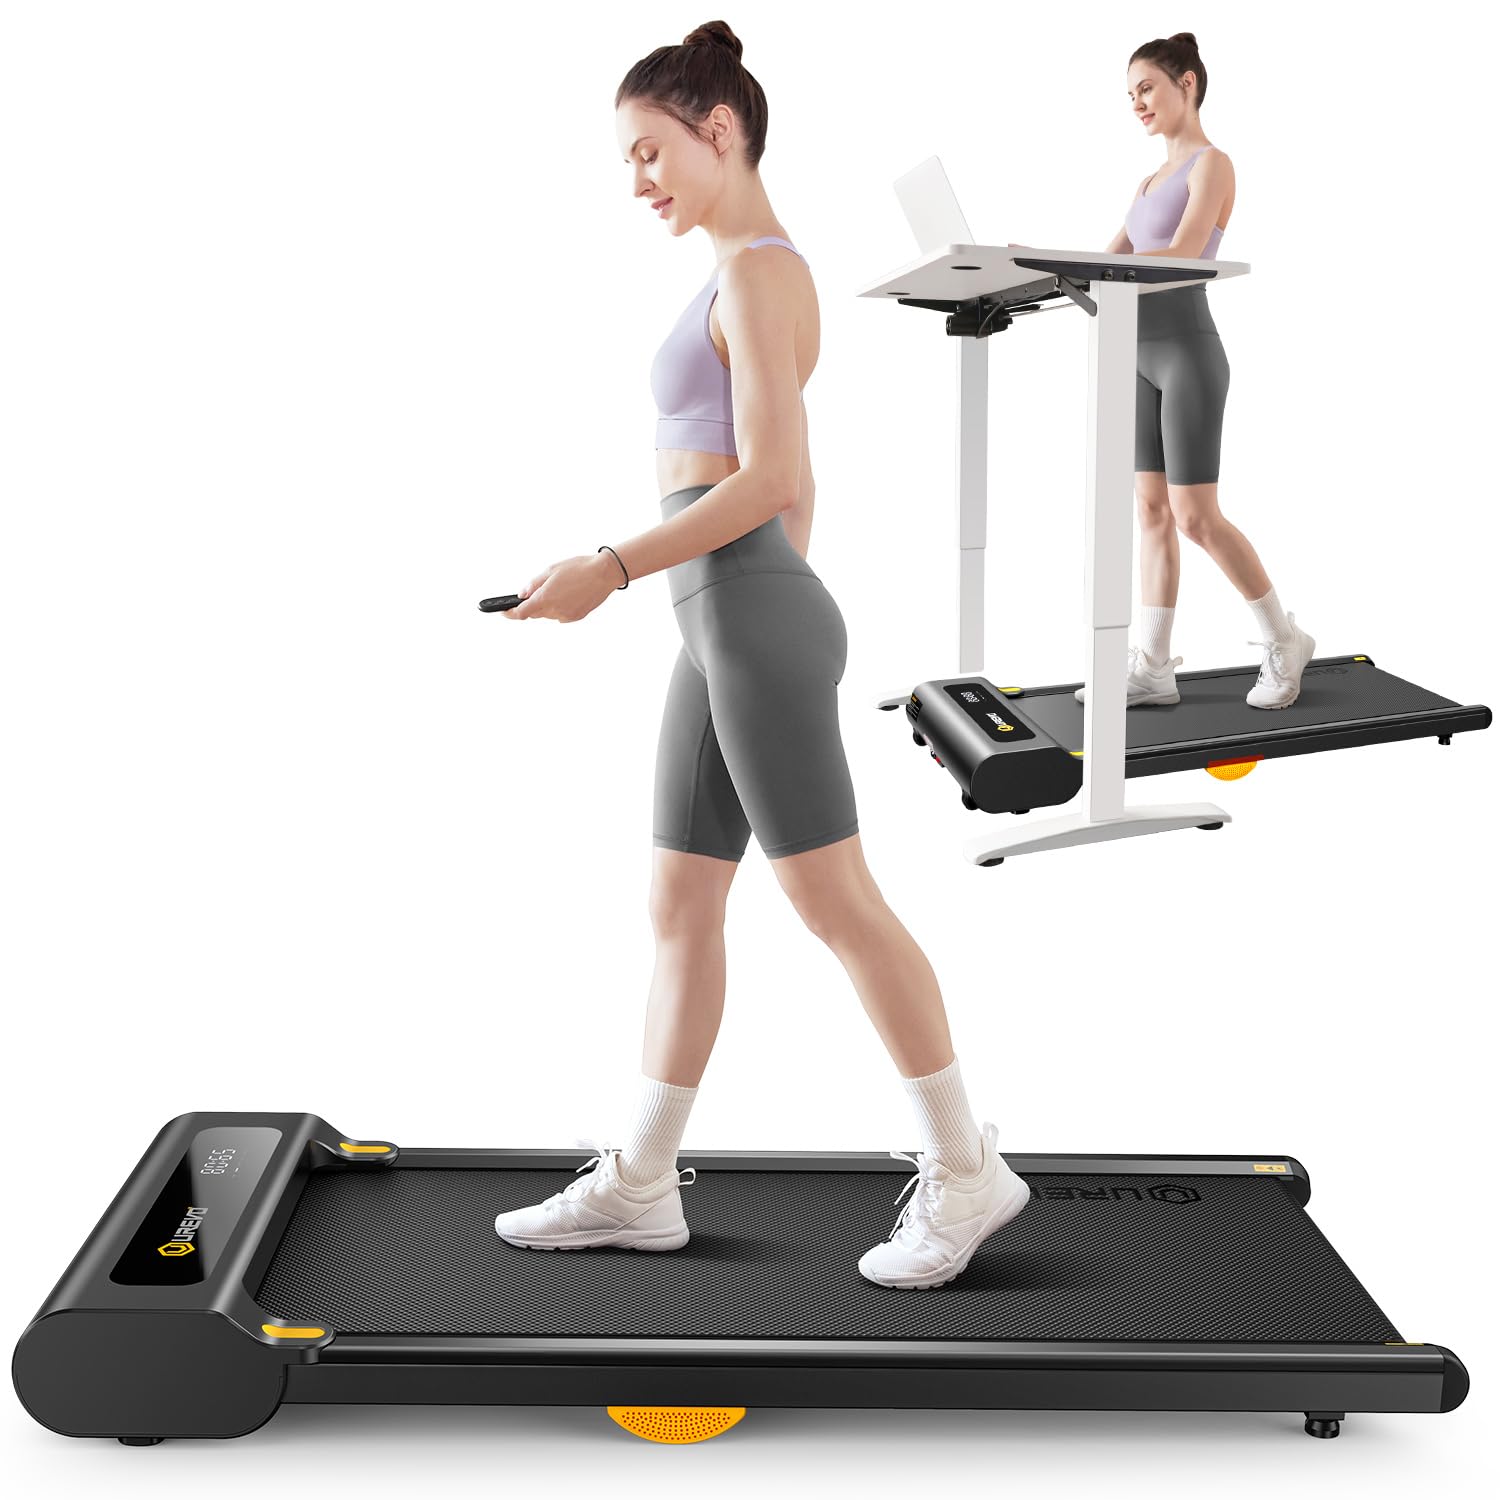 Stay Active at Work: How an Under-Desk Treadmill Can Transform Your Workspace